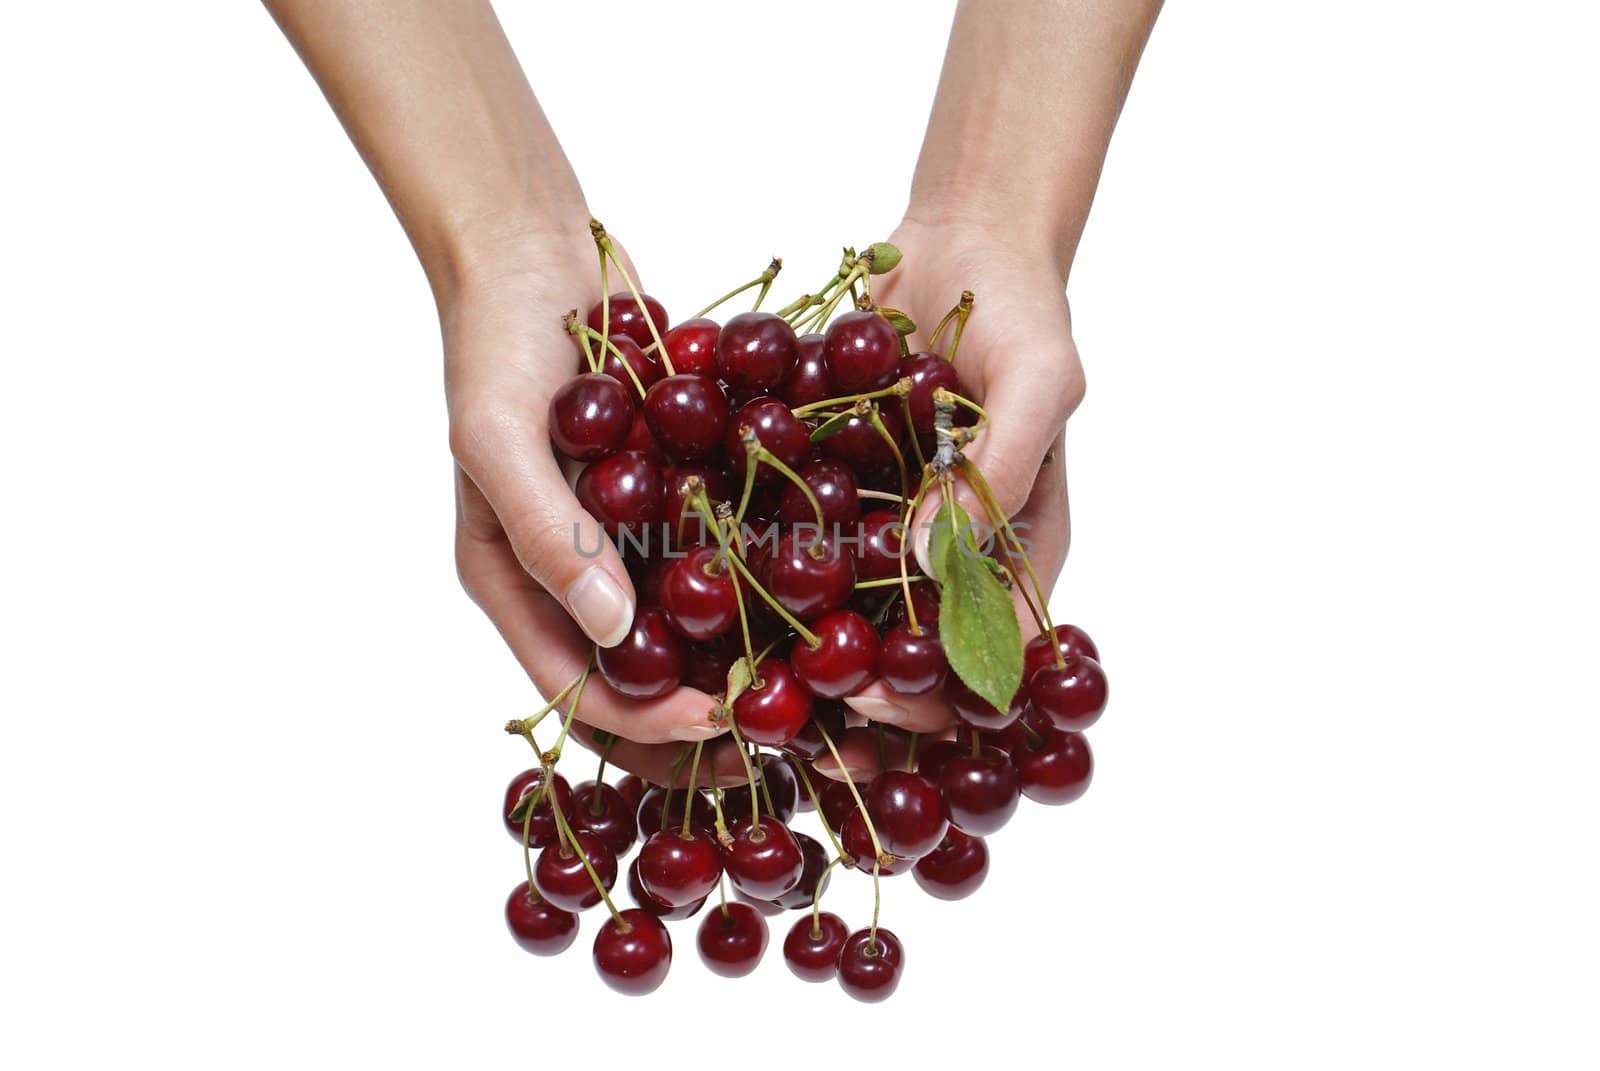 cherry's handful kept in palms  isolated on white background